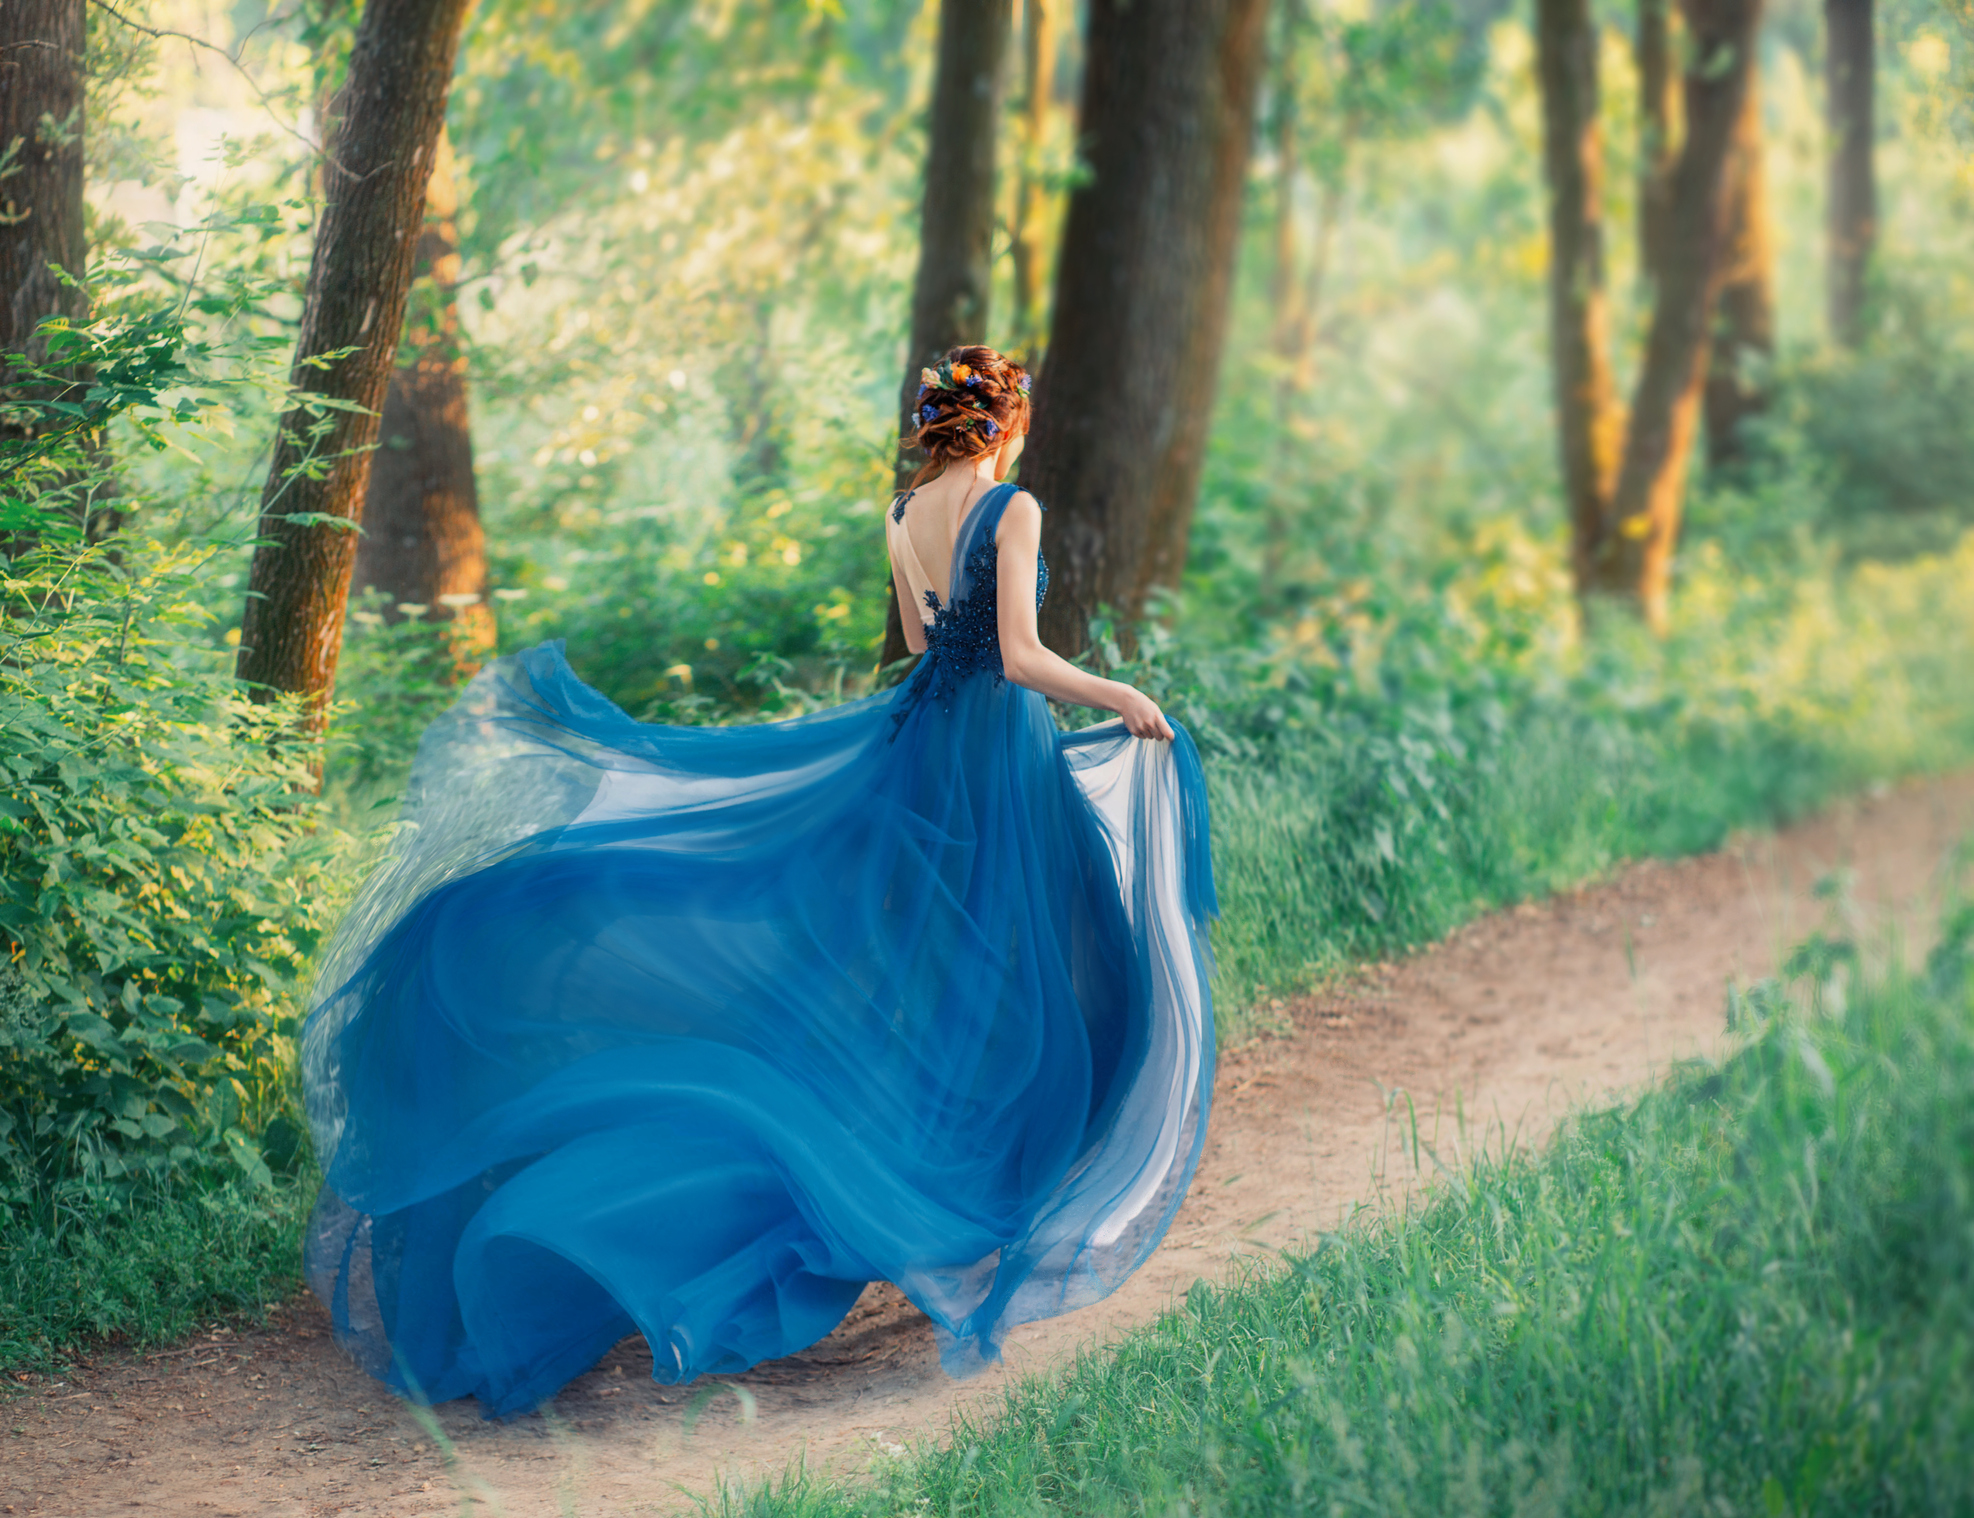 Lady in long elegant blue dress with flying light train